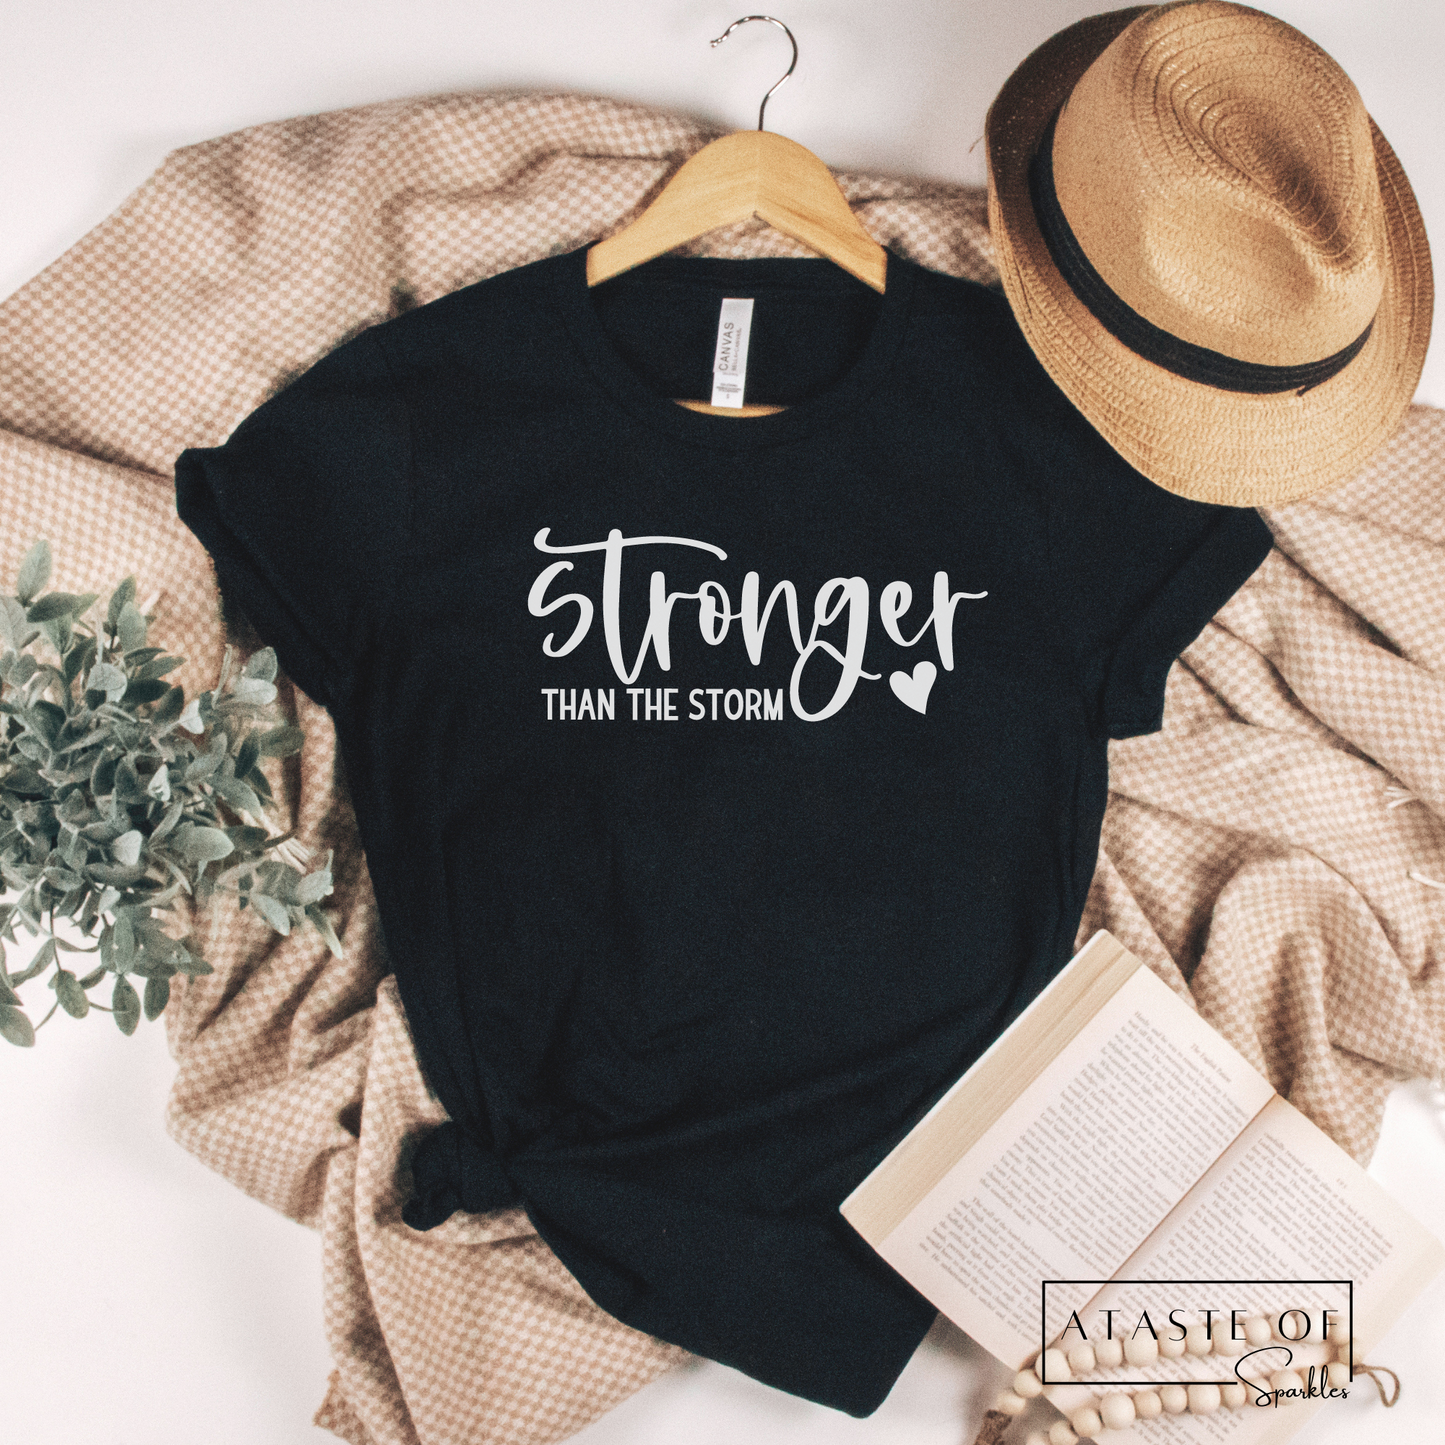 Stronger Than The Storm T-shirt